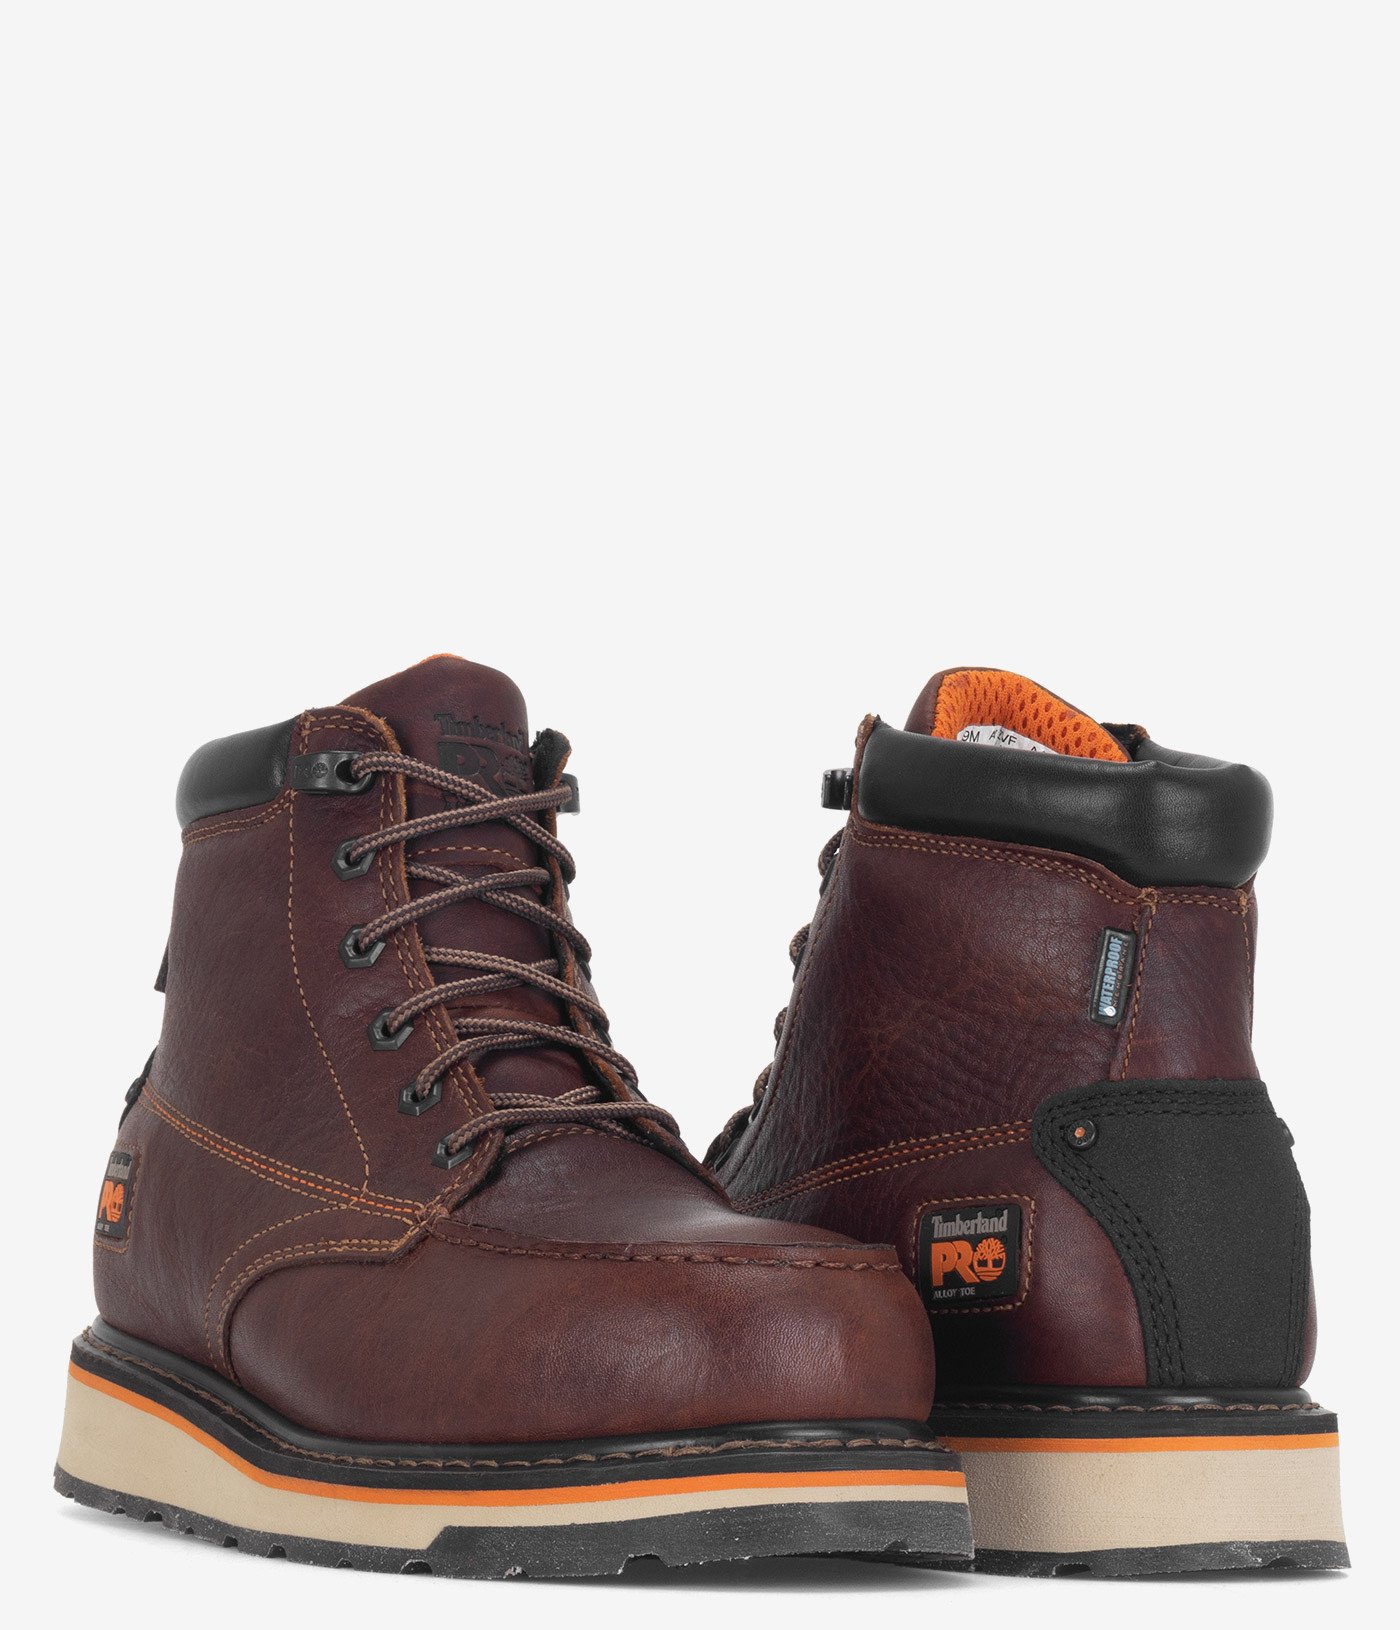 Timberland PRO Gridworks Alloy Safety Toe Waterproof Boot